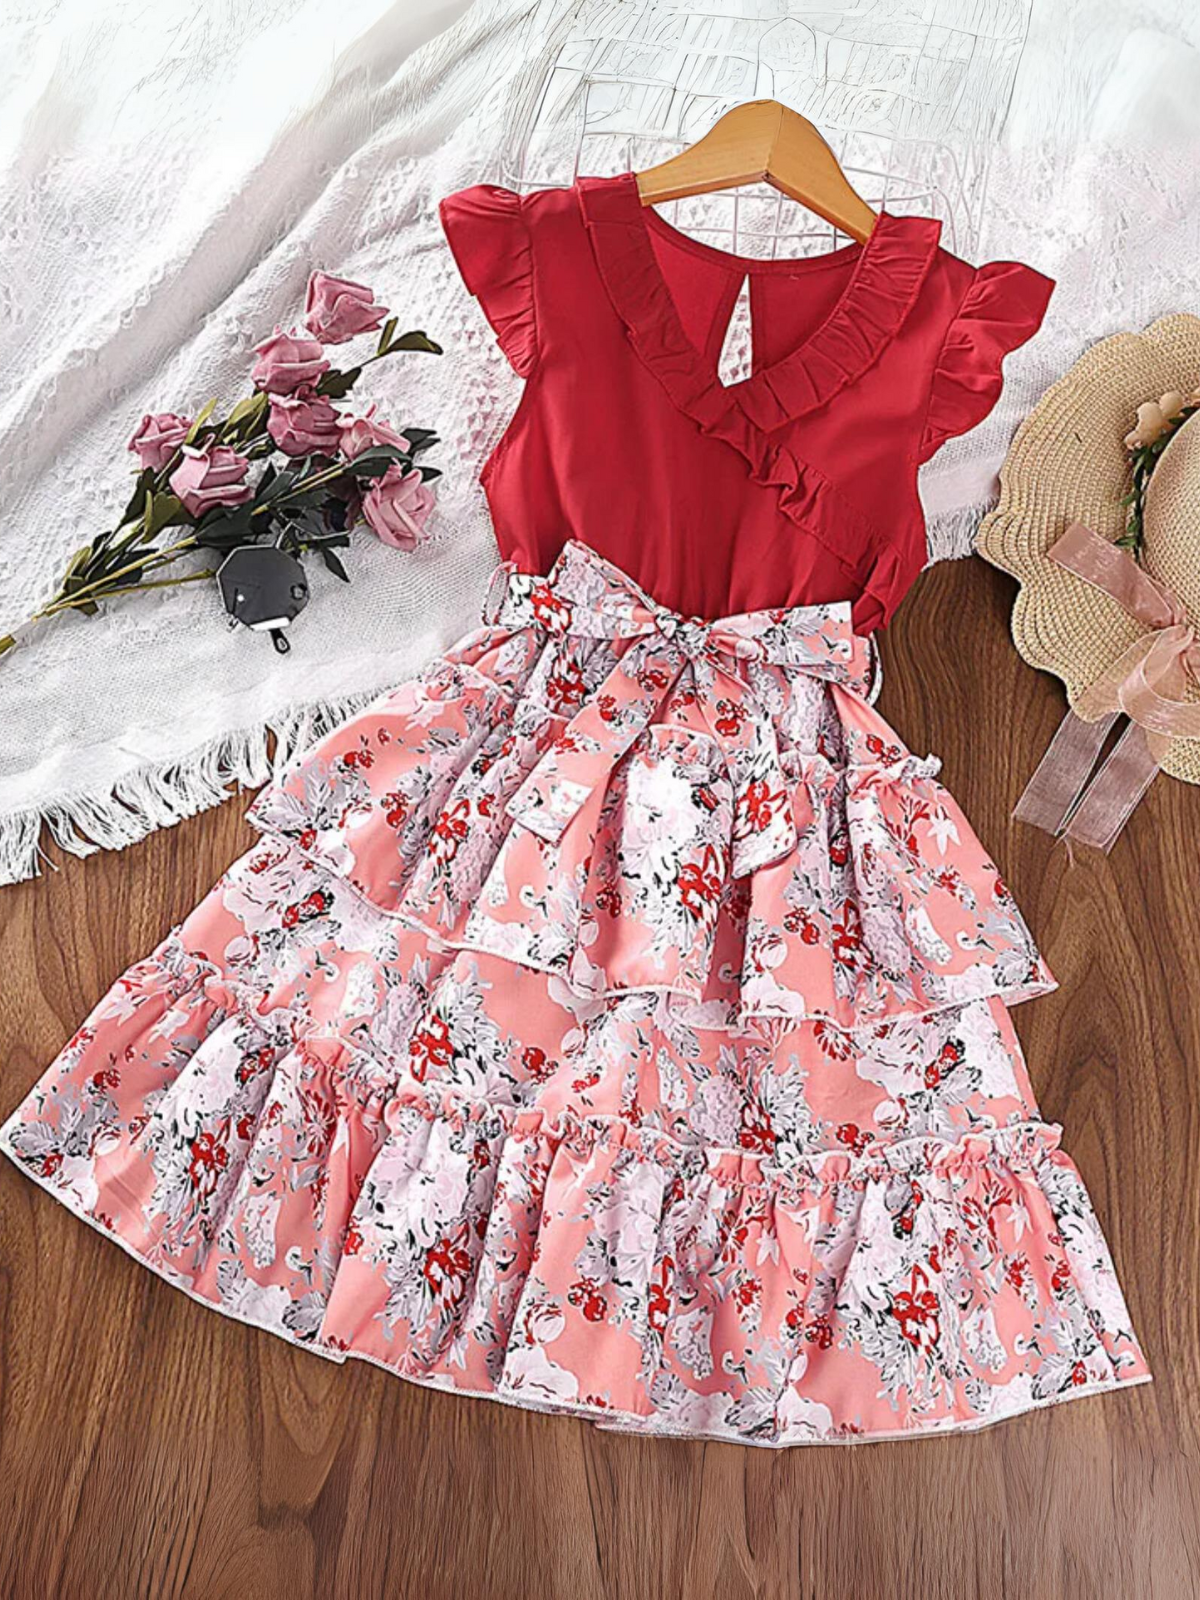 Mia Belle Girls Layered Floral Dress | Girls Summer Outfits